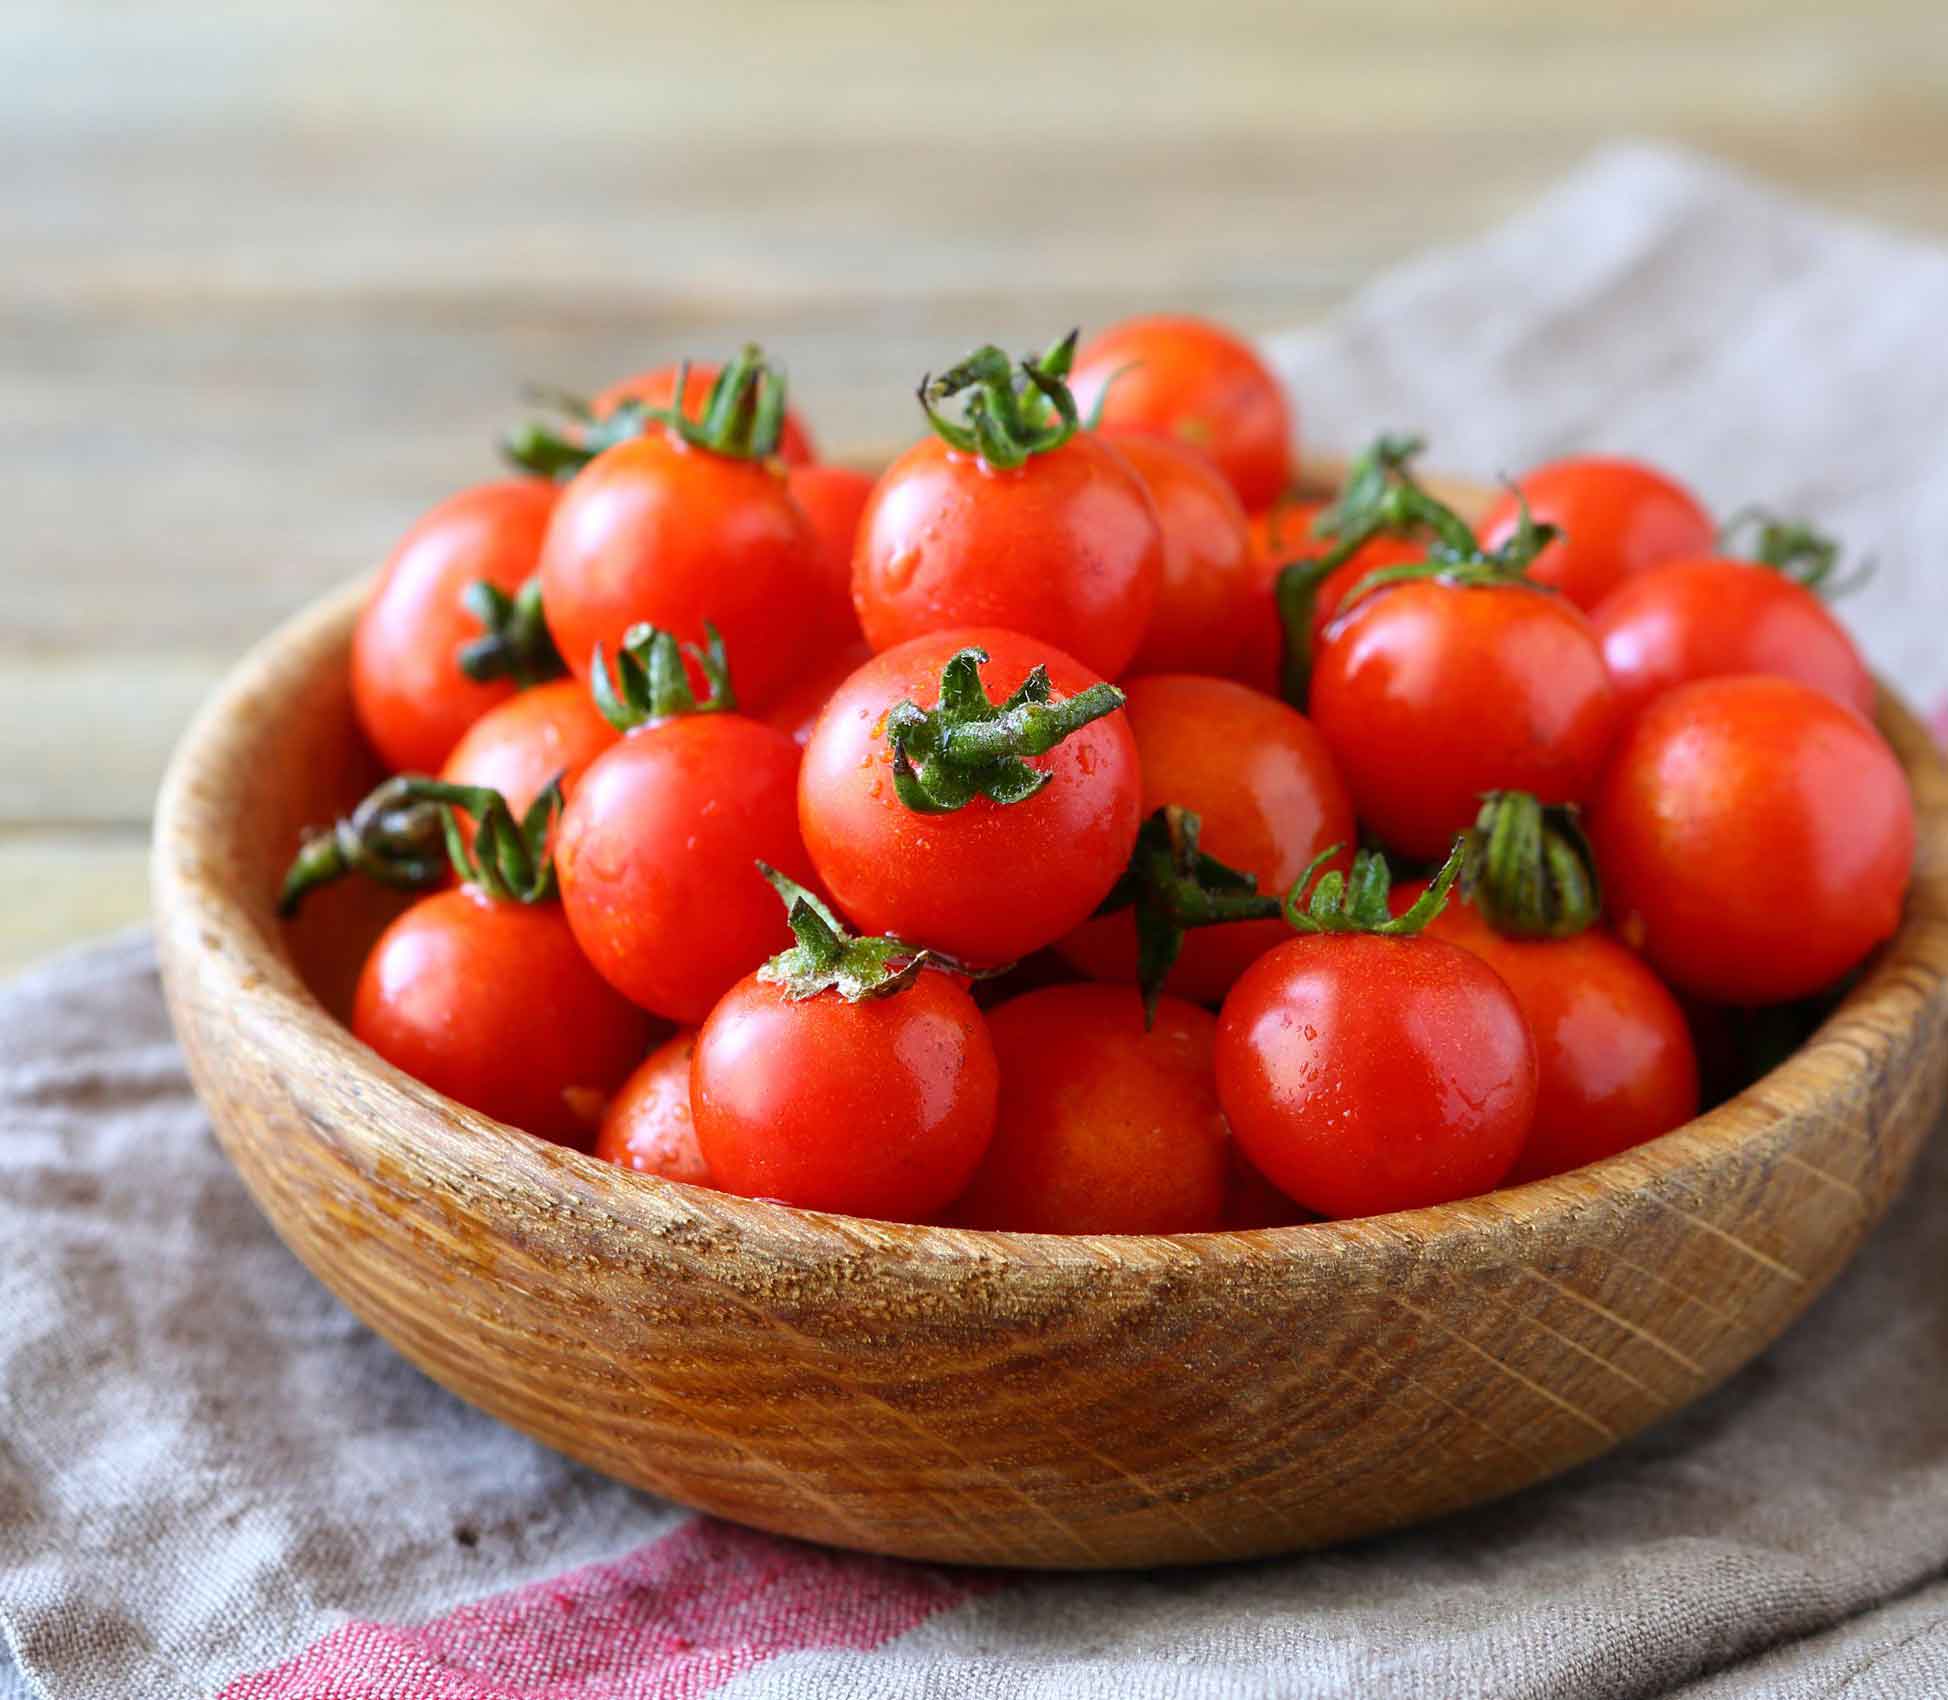 Learn more about tomatoes